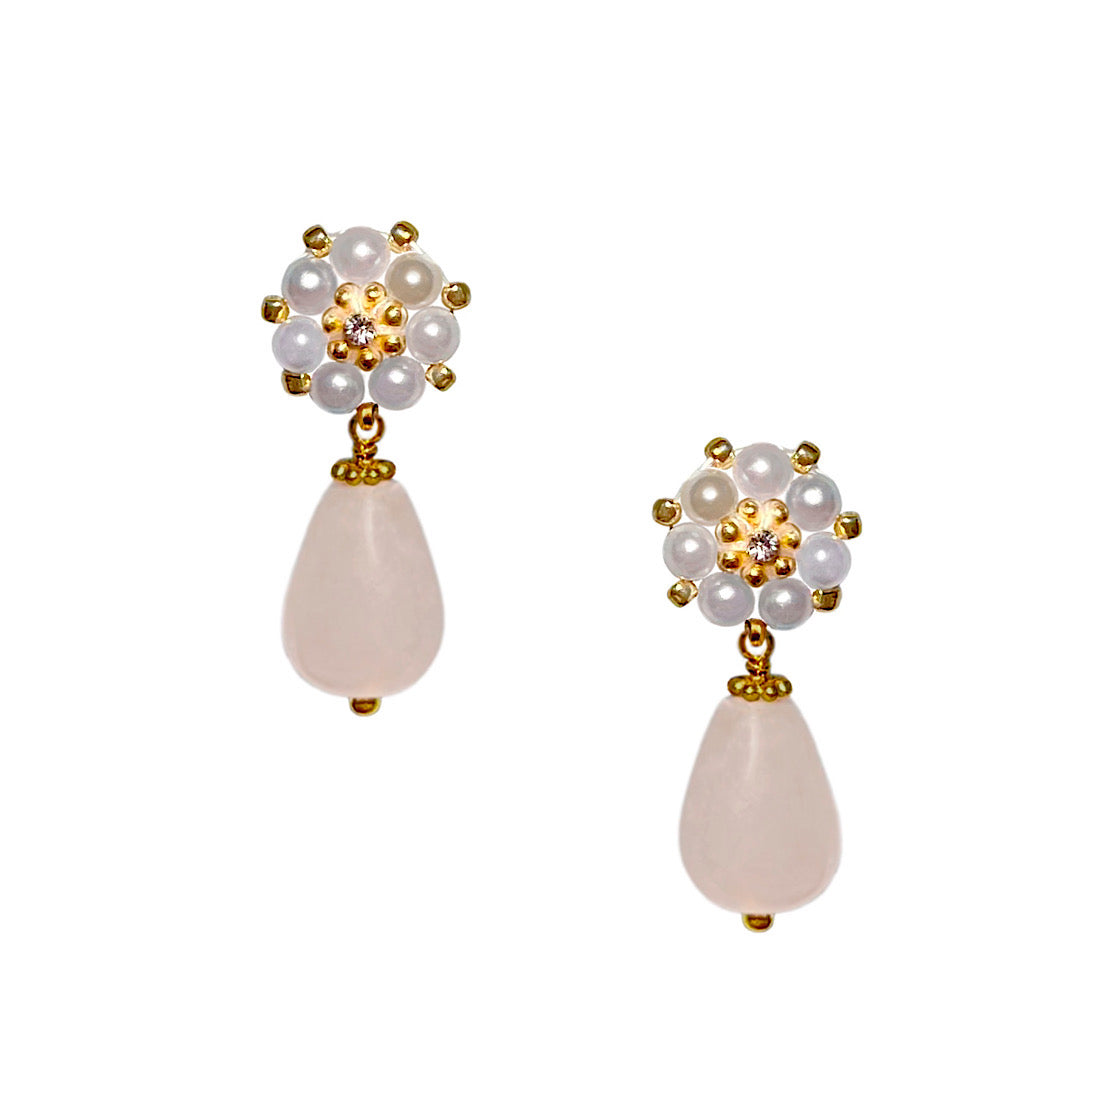 light pink drop earrings with rosequartz and swarovski stones